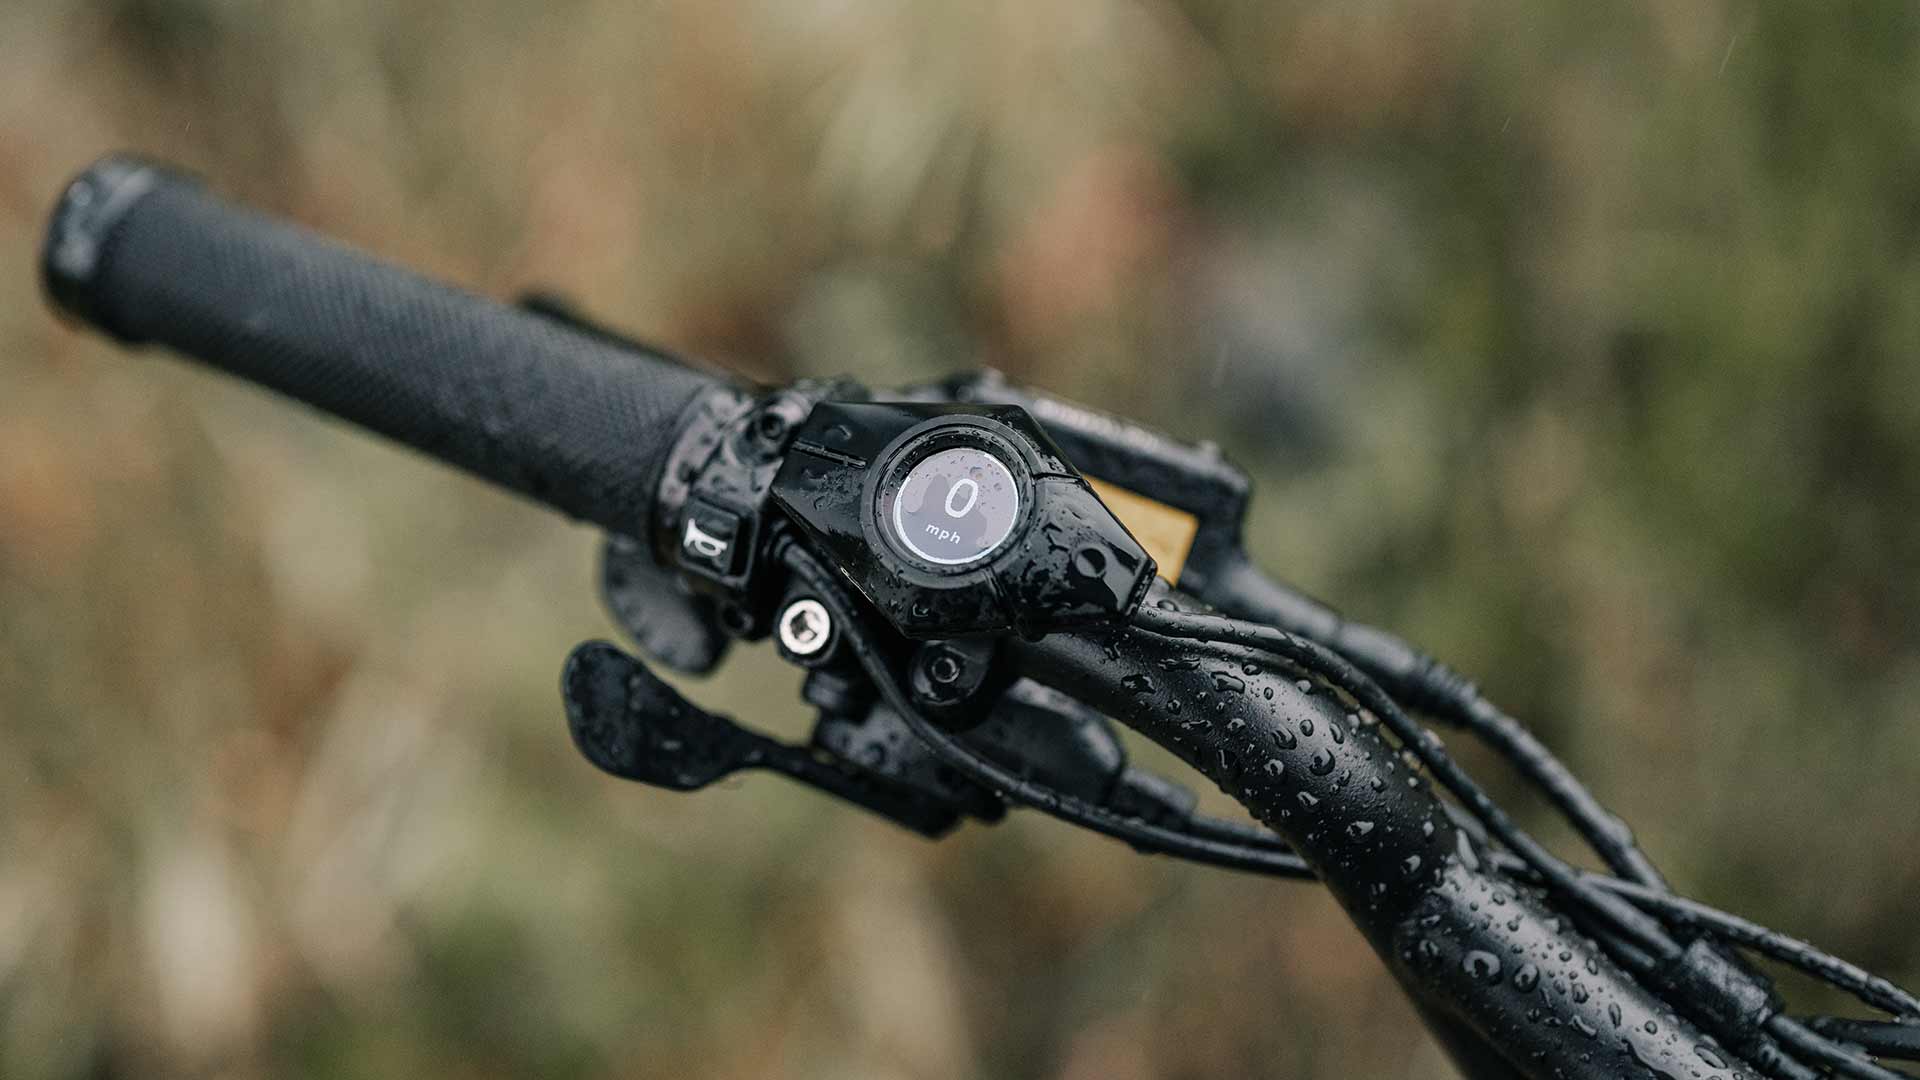 Closeup of the Super73-R Adventure Series ebike highlighting the smart display located on the handlebar.